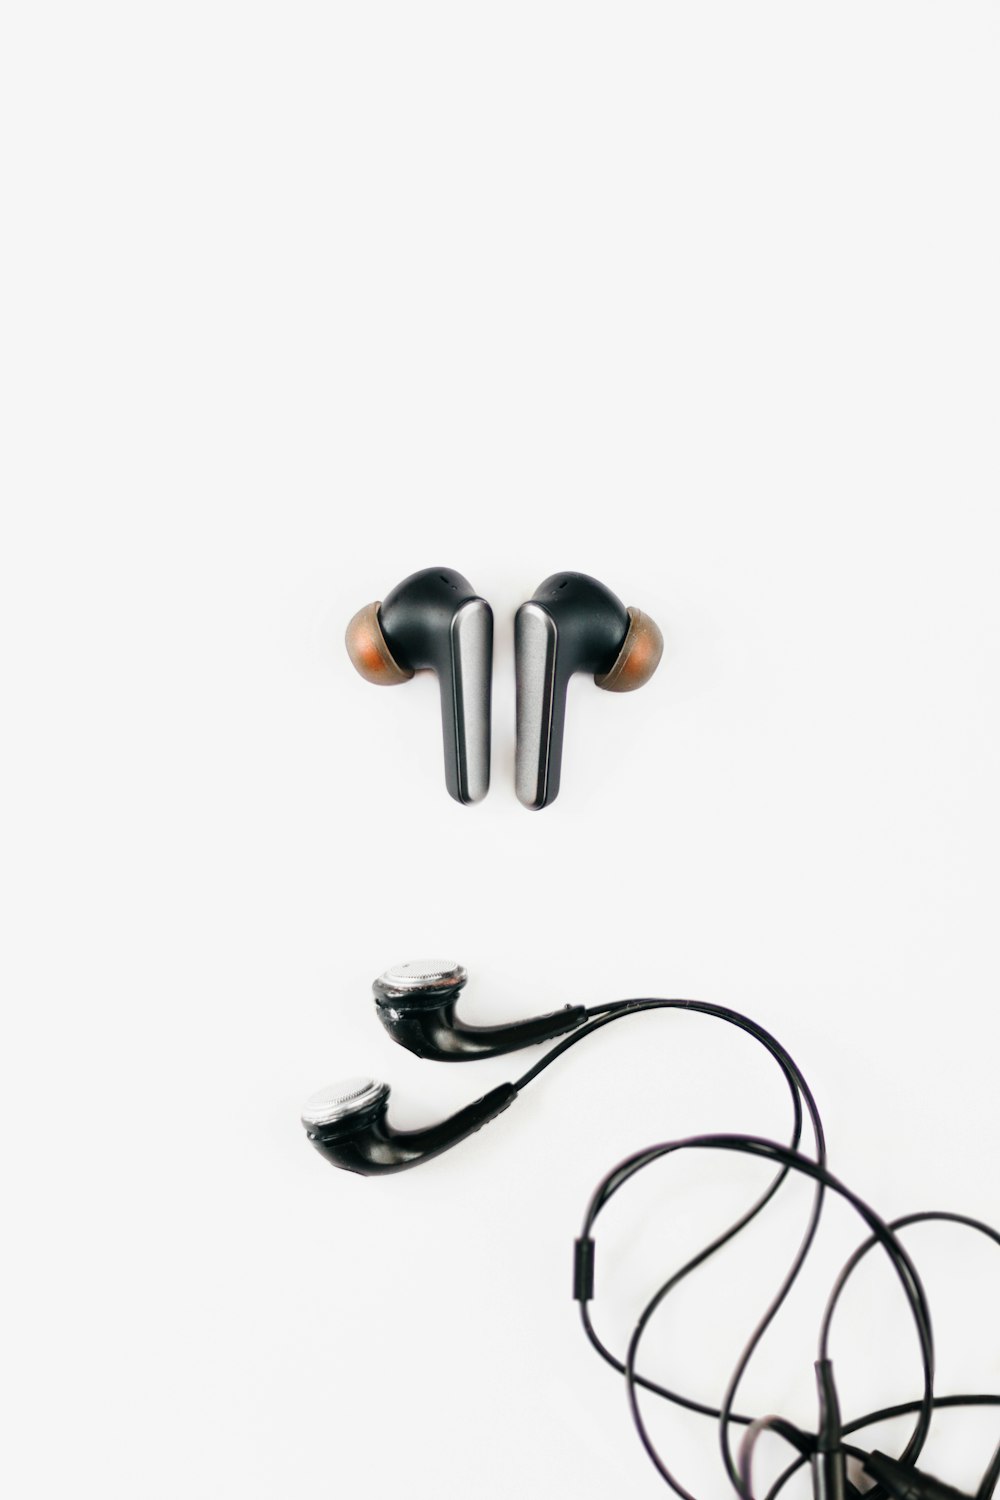 a pair of black earphones sitting on top of a white surface